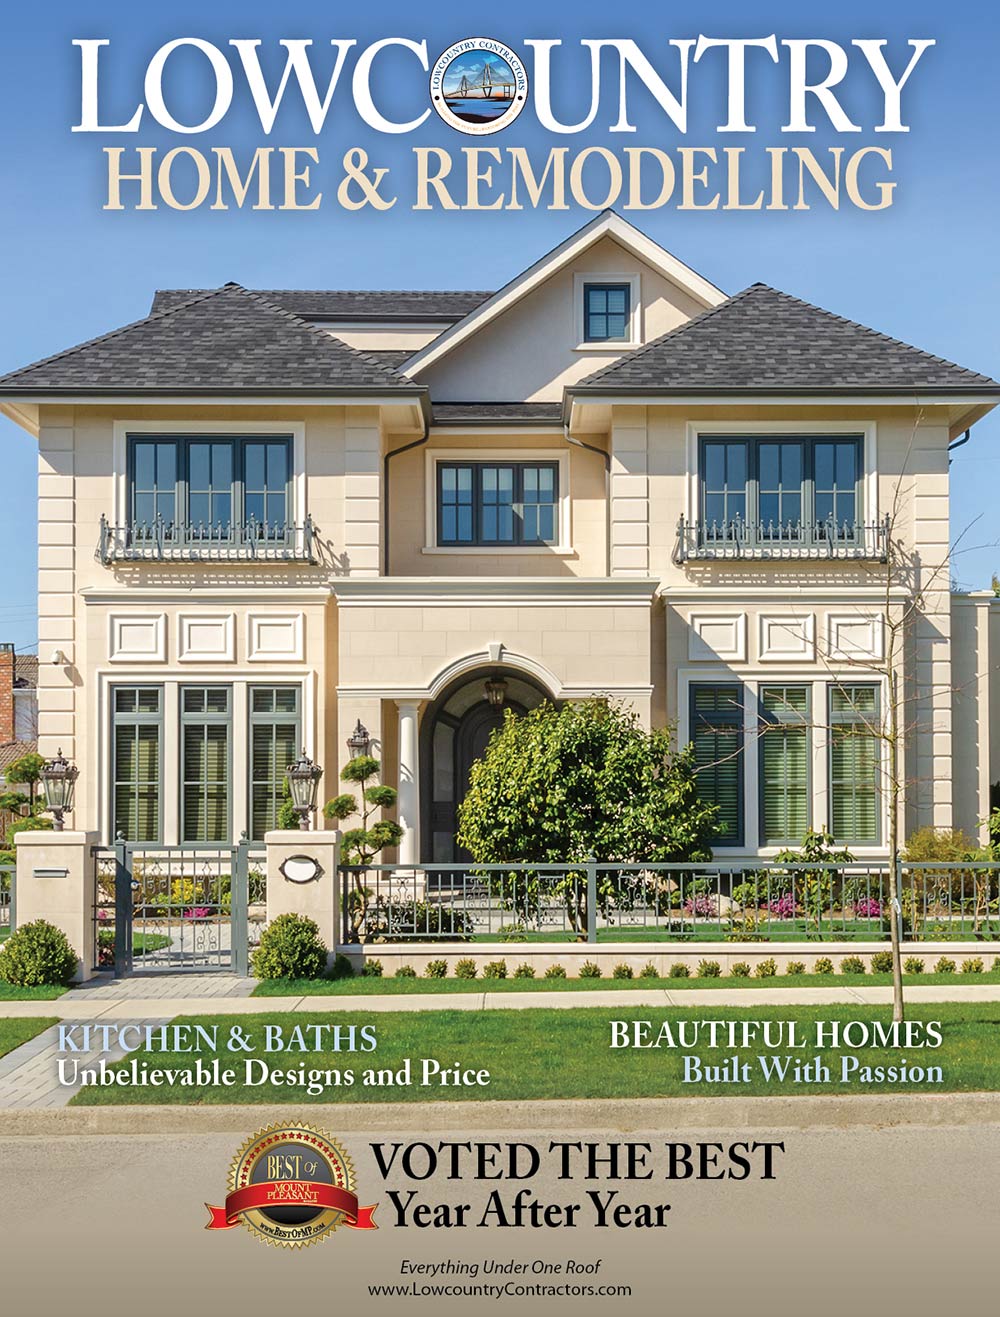 Lowcountry Home & Remodeling Magazine